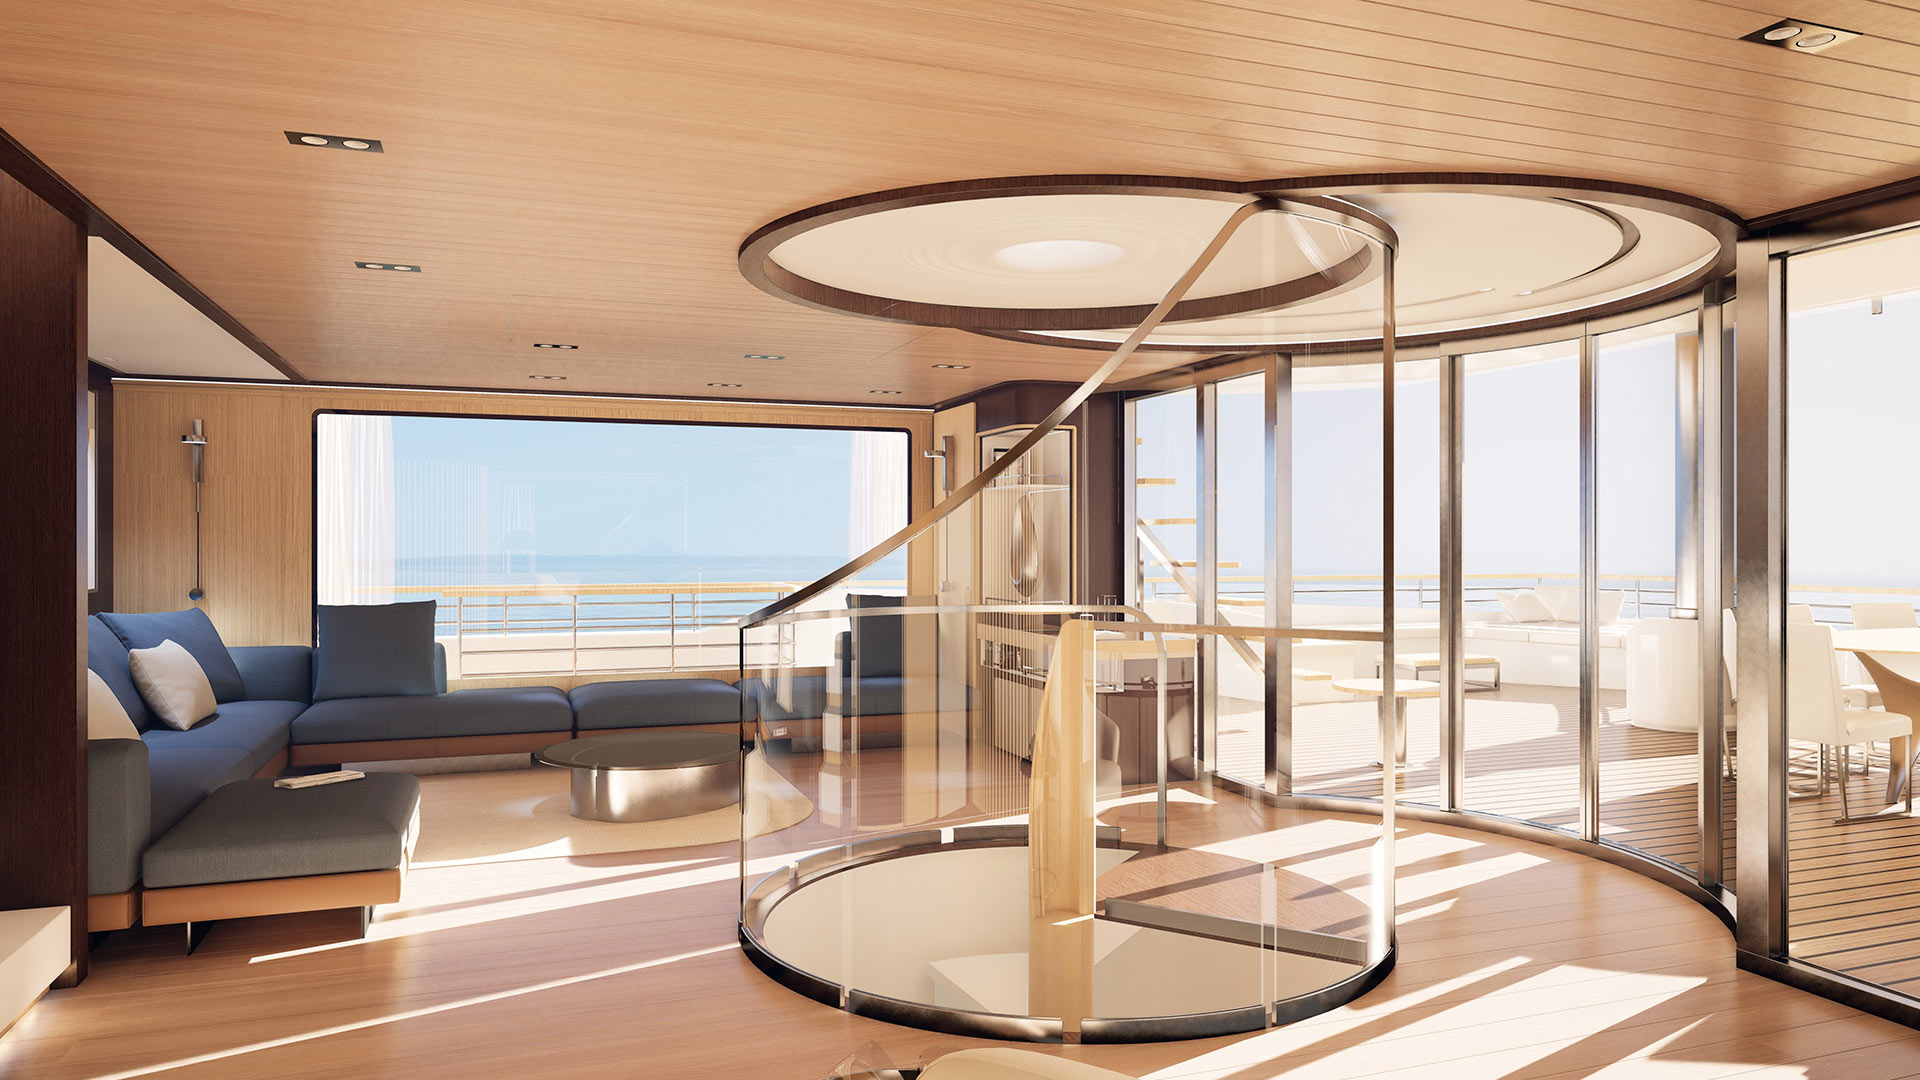 Luxurious yacht interior upper deck with stairs in the middle 